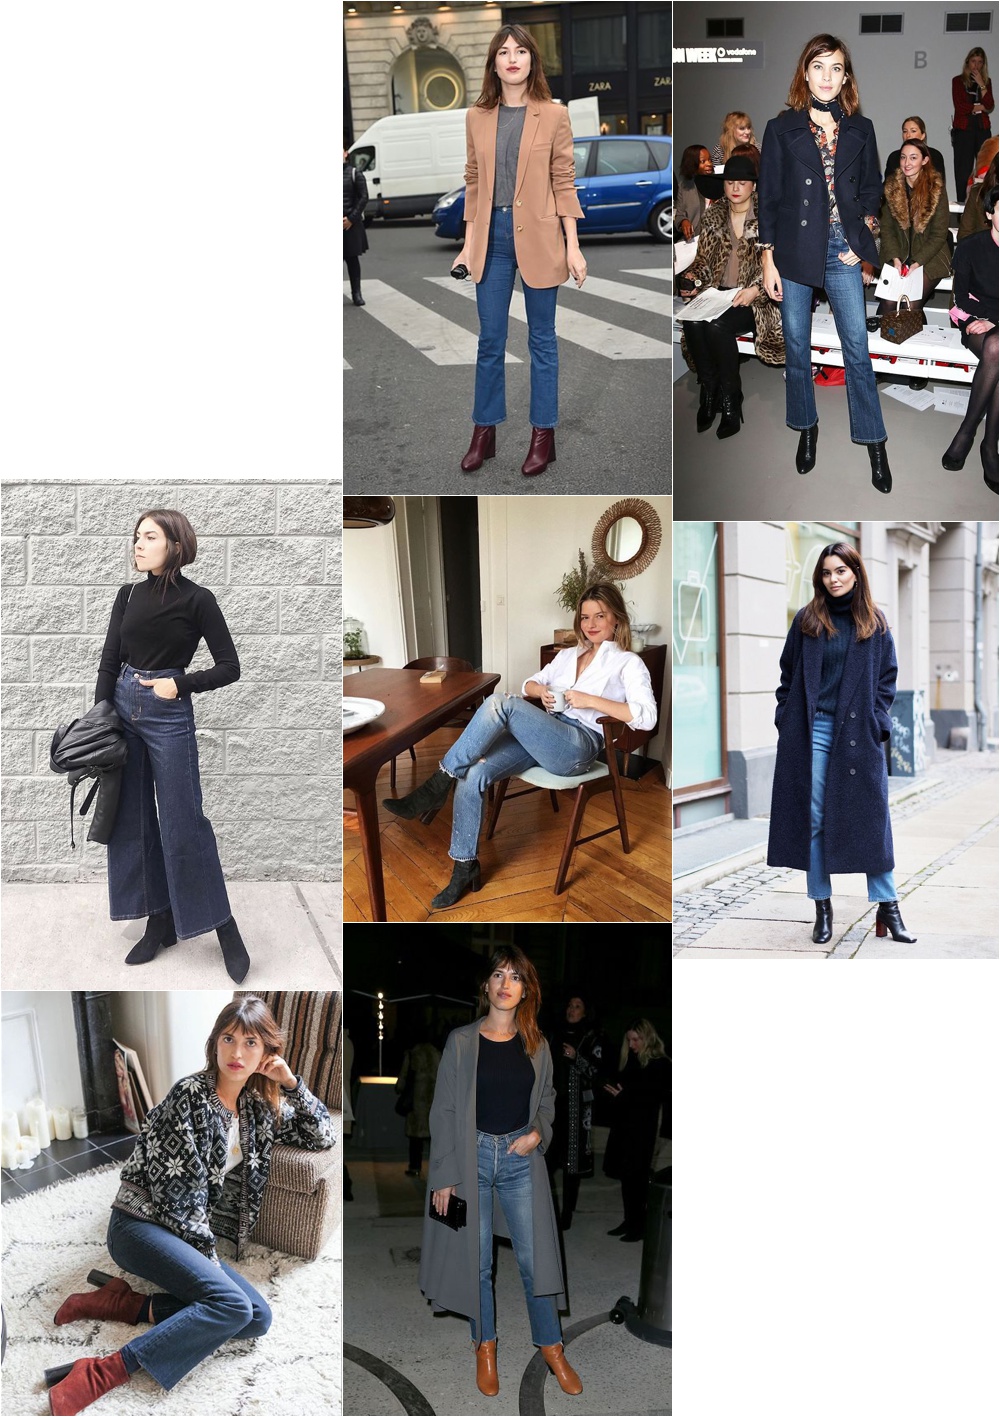 The Latest Ankle Boot Trend  Bloglovin fashion, Sweaters women